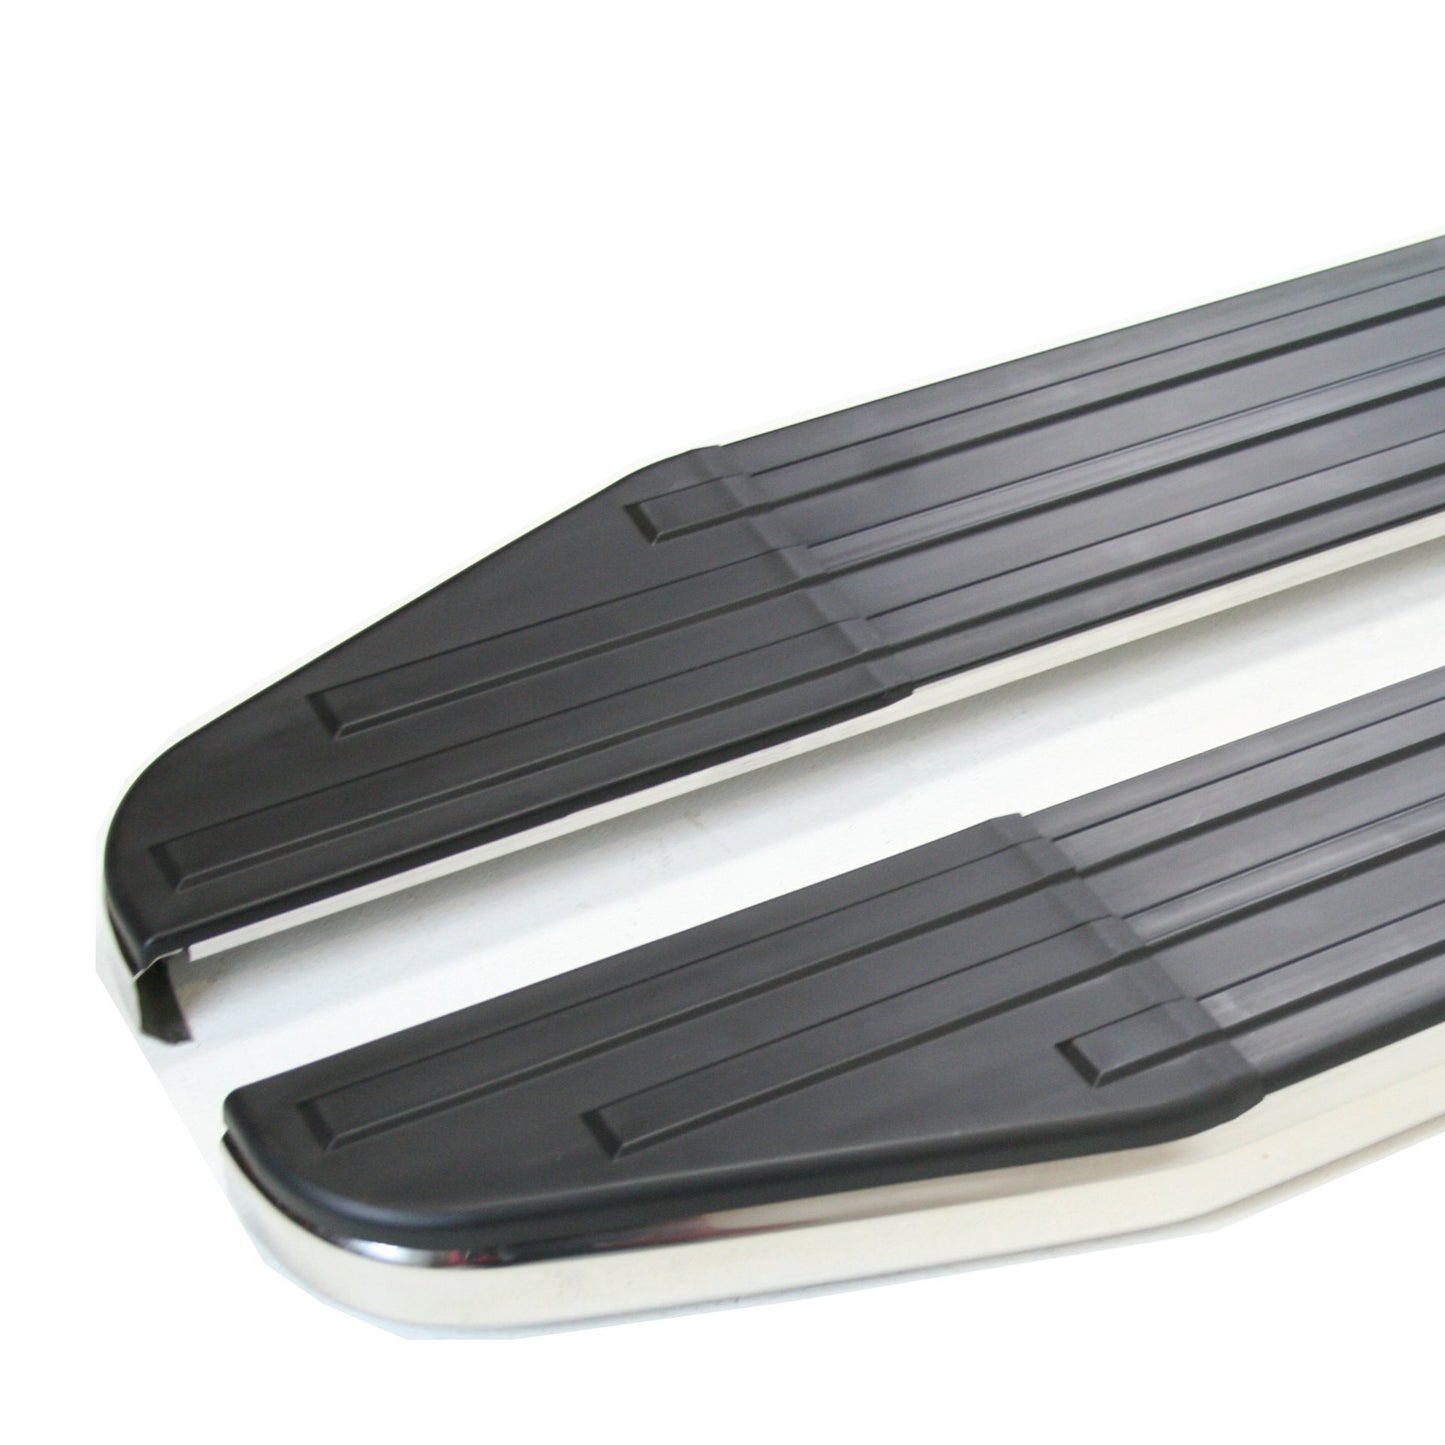 Raptor Side Steps Running Boards for Mazda CX-5 2013-2017 -  - sold by Direct4x4